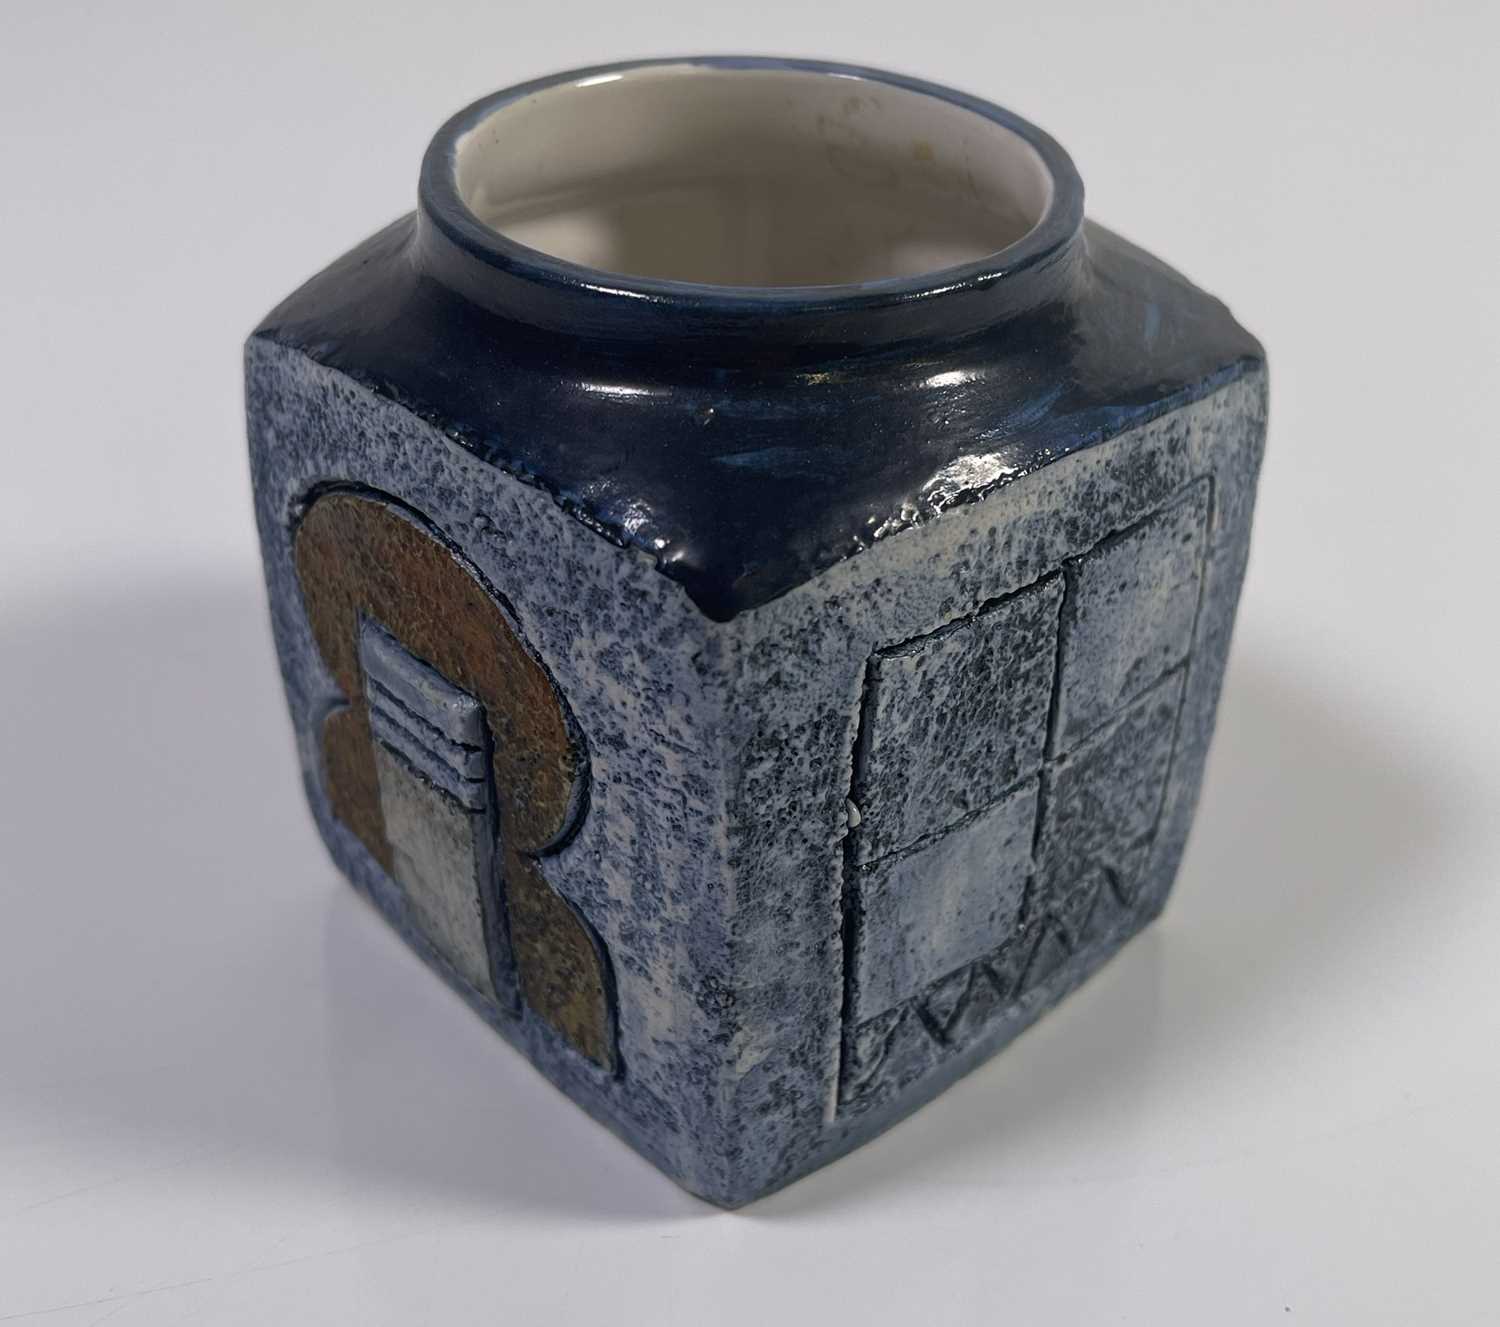 TROIKA - MARMALADE POT DECORATED BY SALLY BENCH. - Image 2 of 3